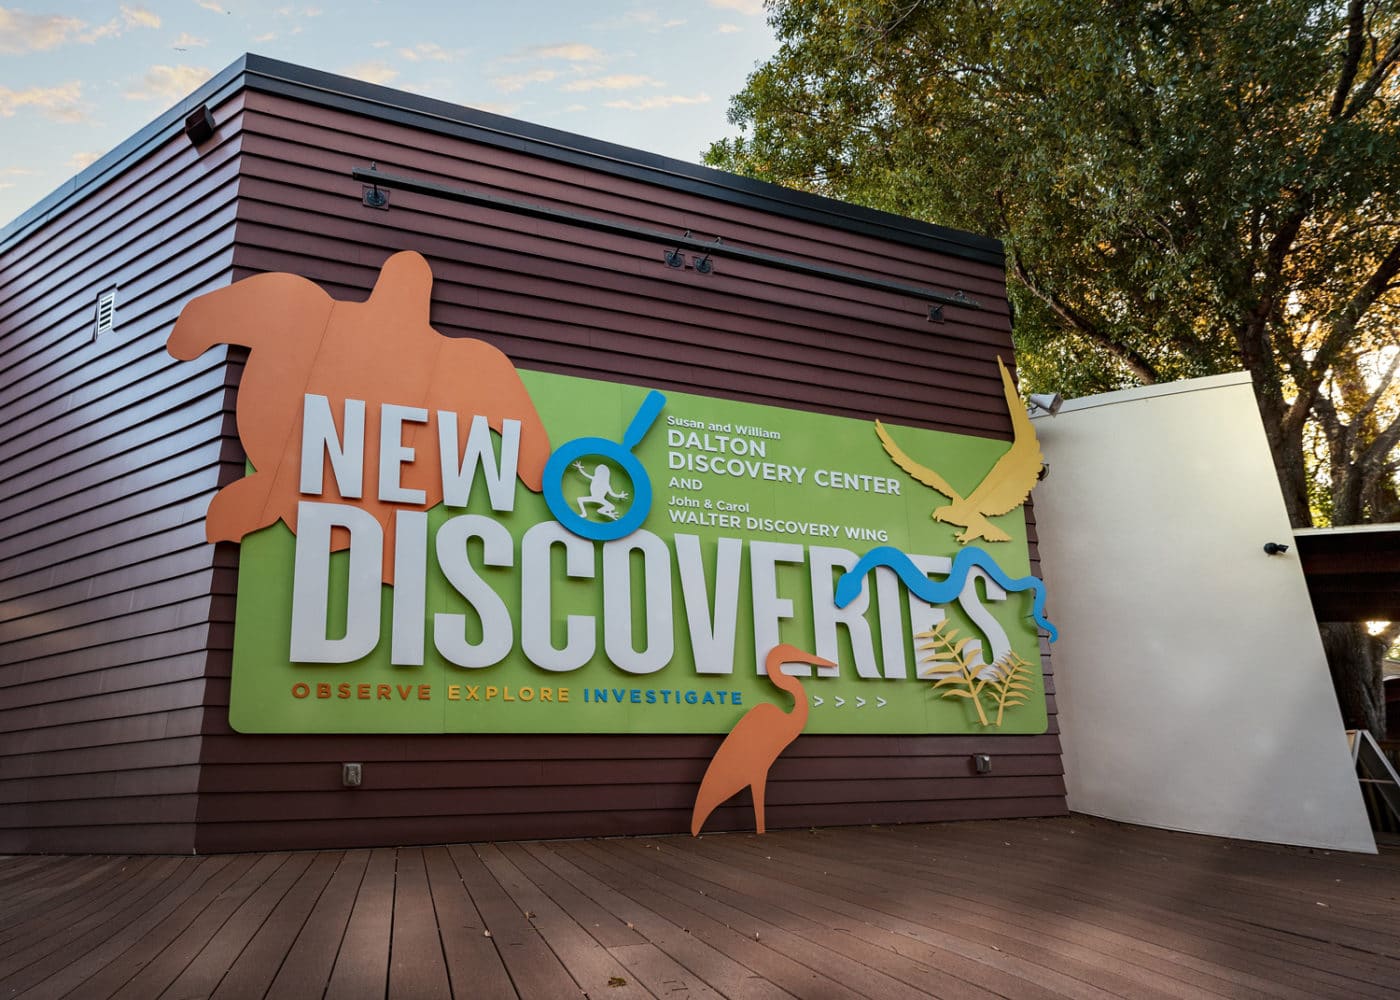 New Discoveries sign outside of the Dalton Discovery Center